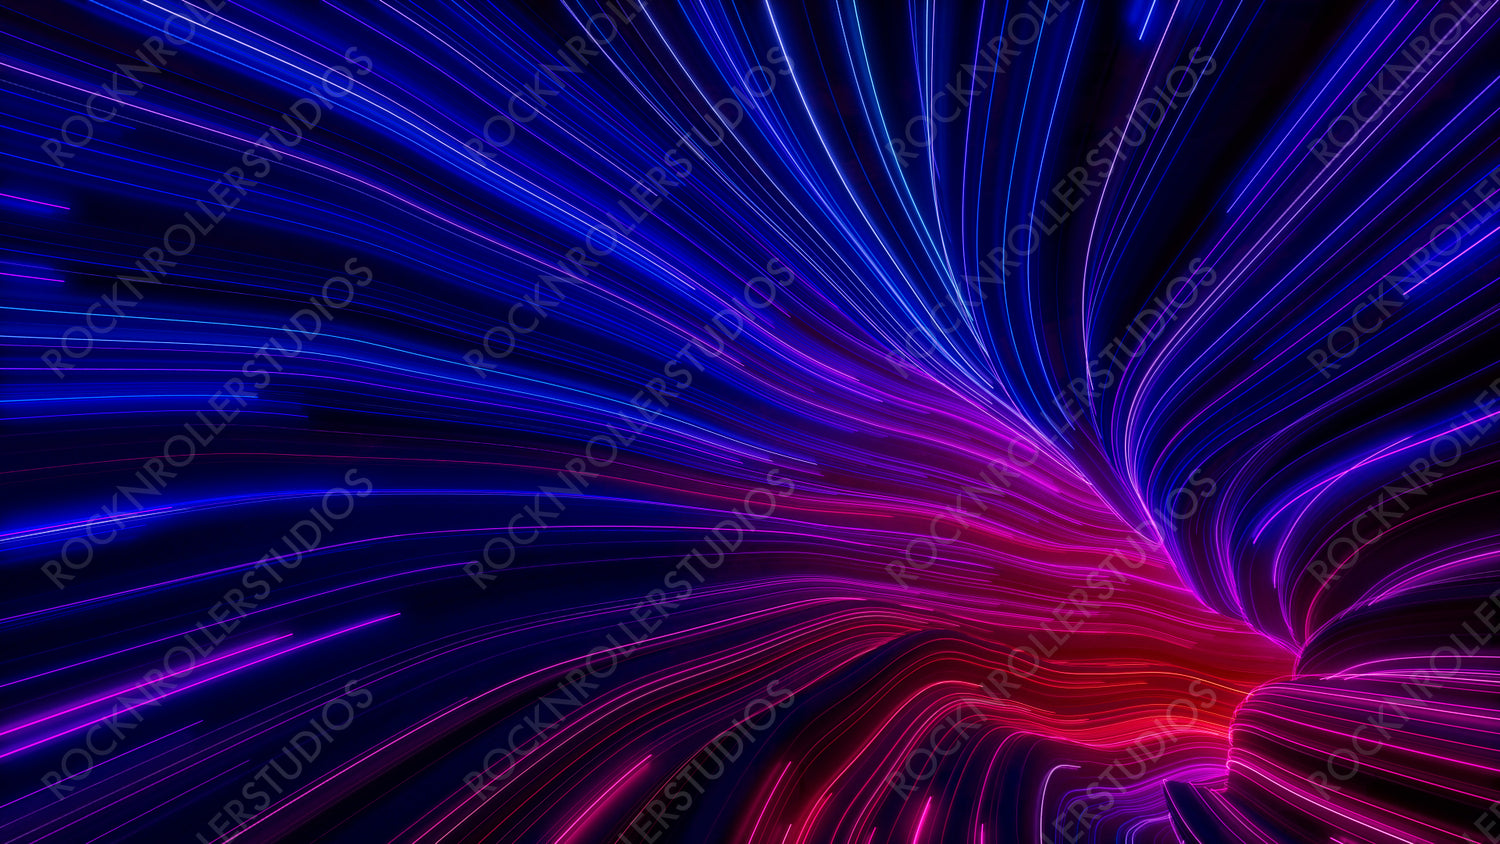 Colorful Lines Tunnel with Purple, Blue and Pink Swirls. 3D Render.